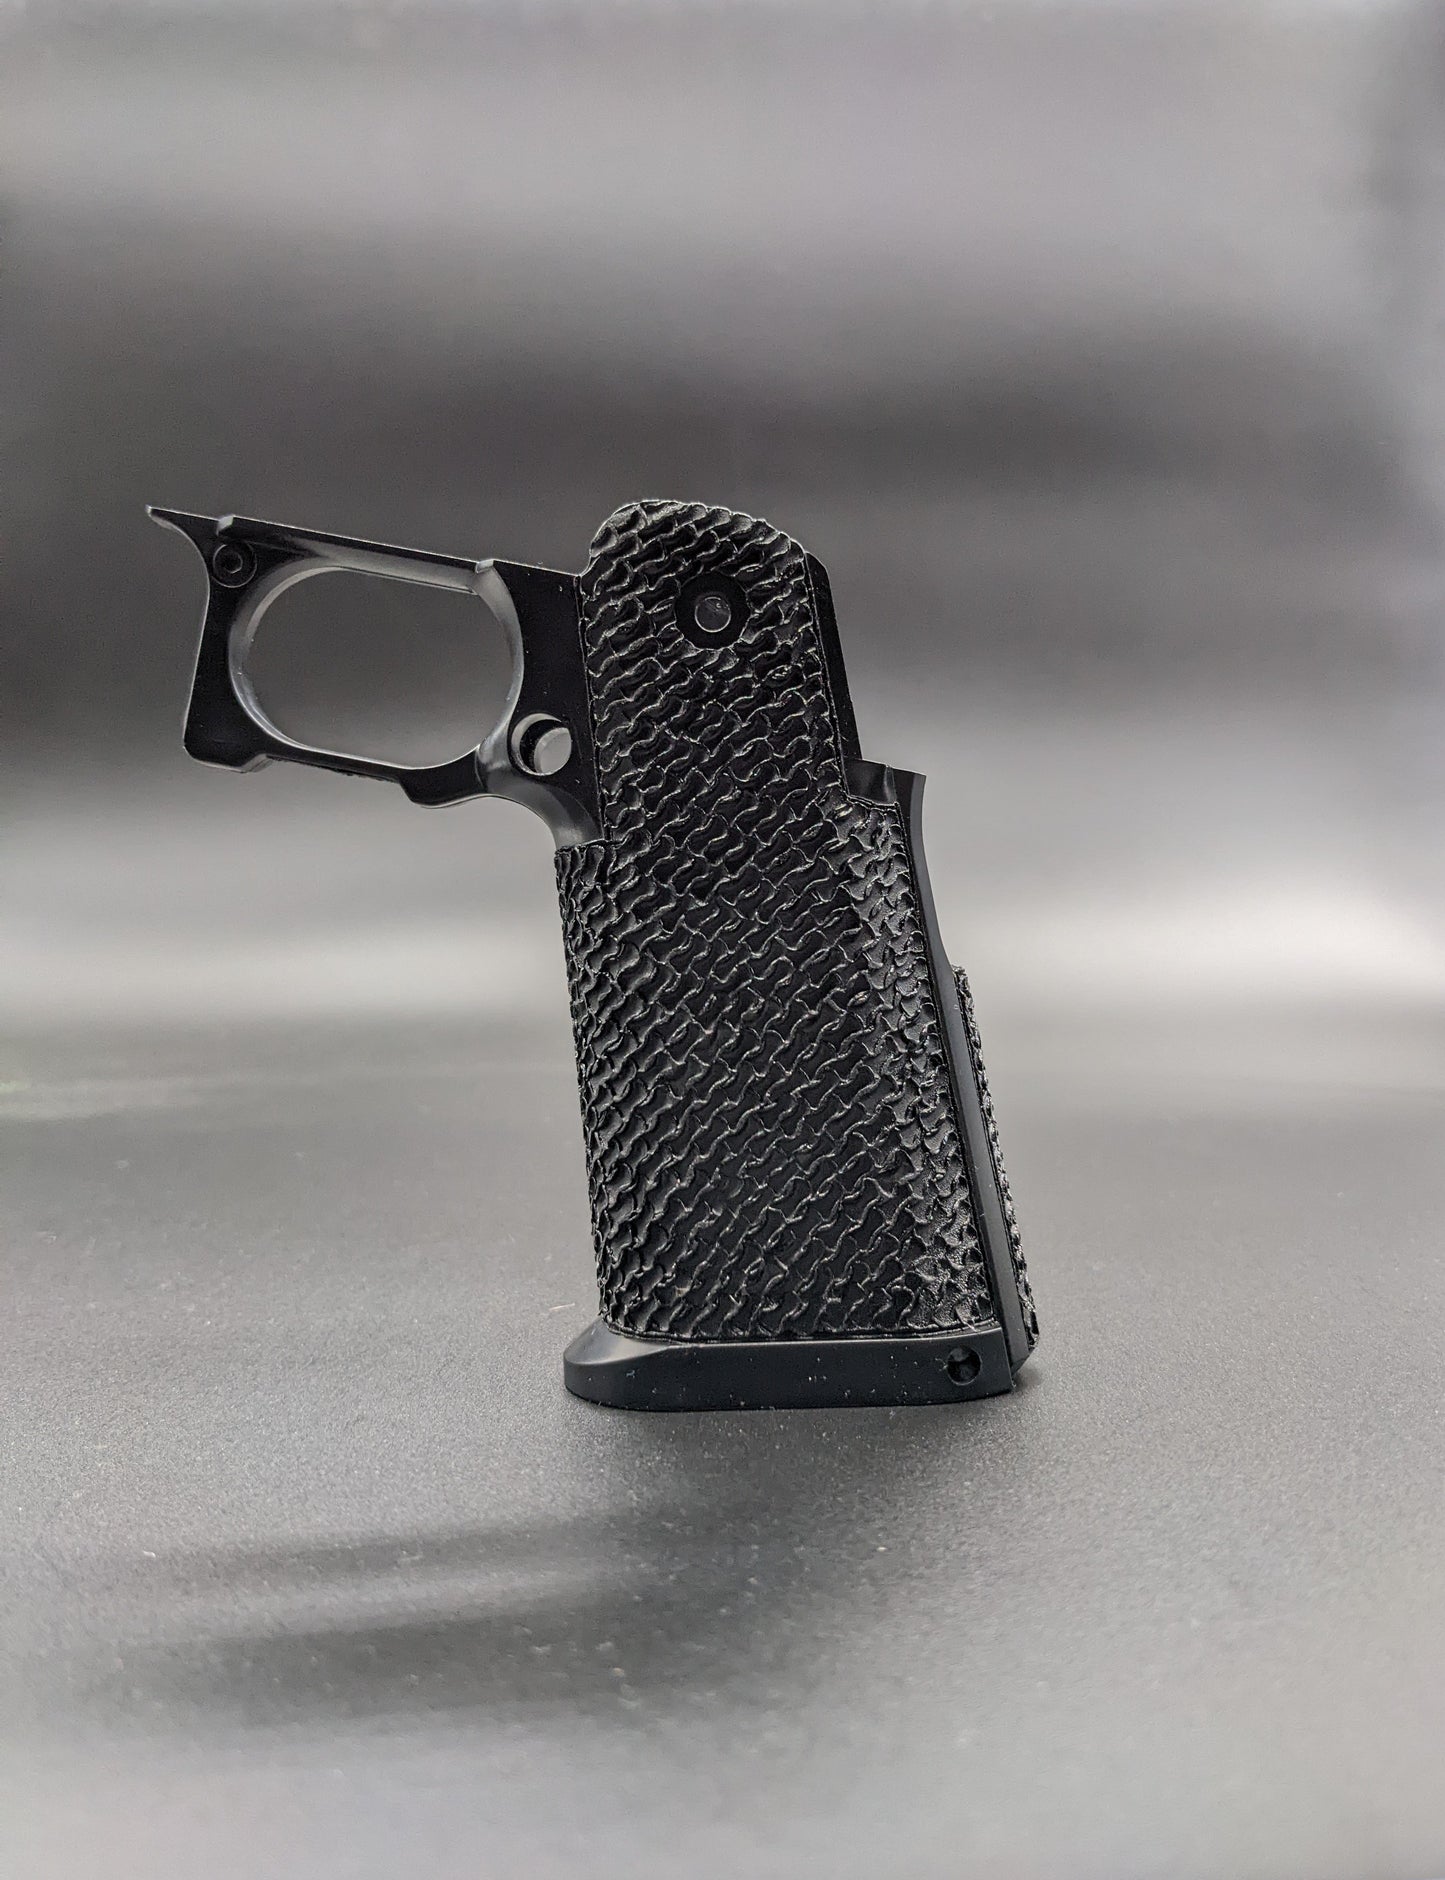 Cow Cow Hi-Capa 4.3/5.1 Stippled Grip - Wave Chaser